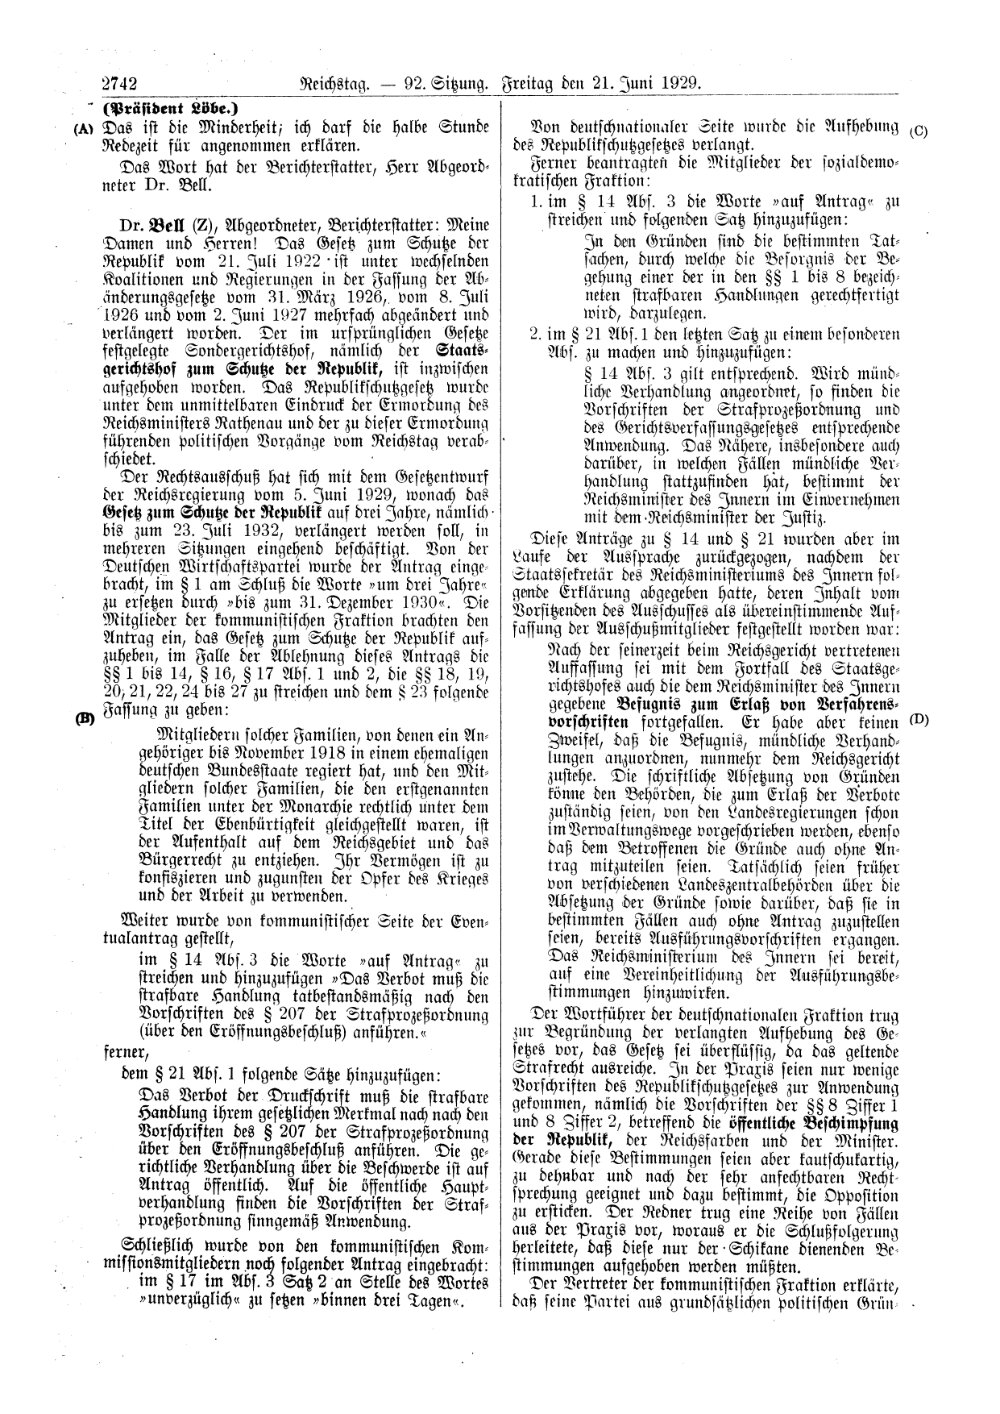 Scan of page 2742